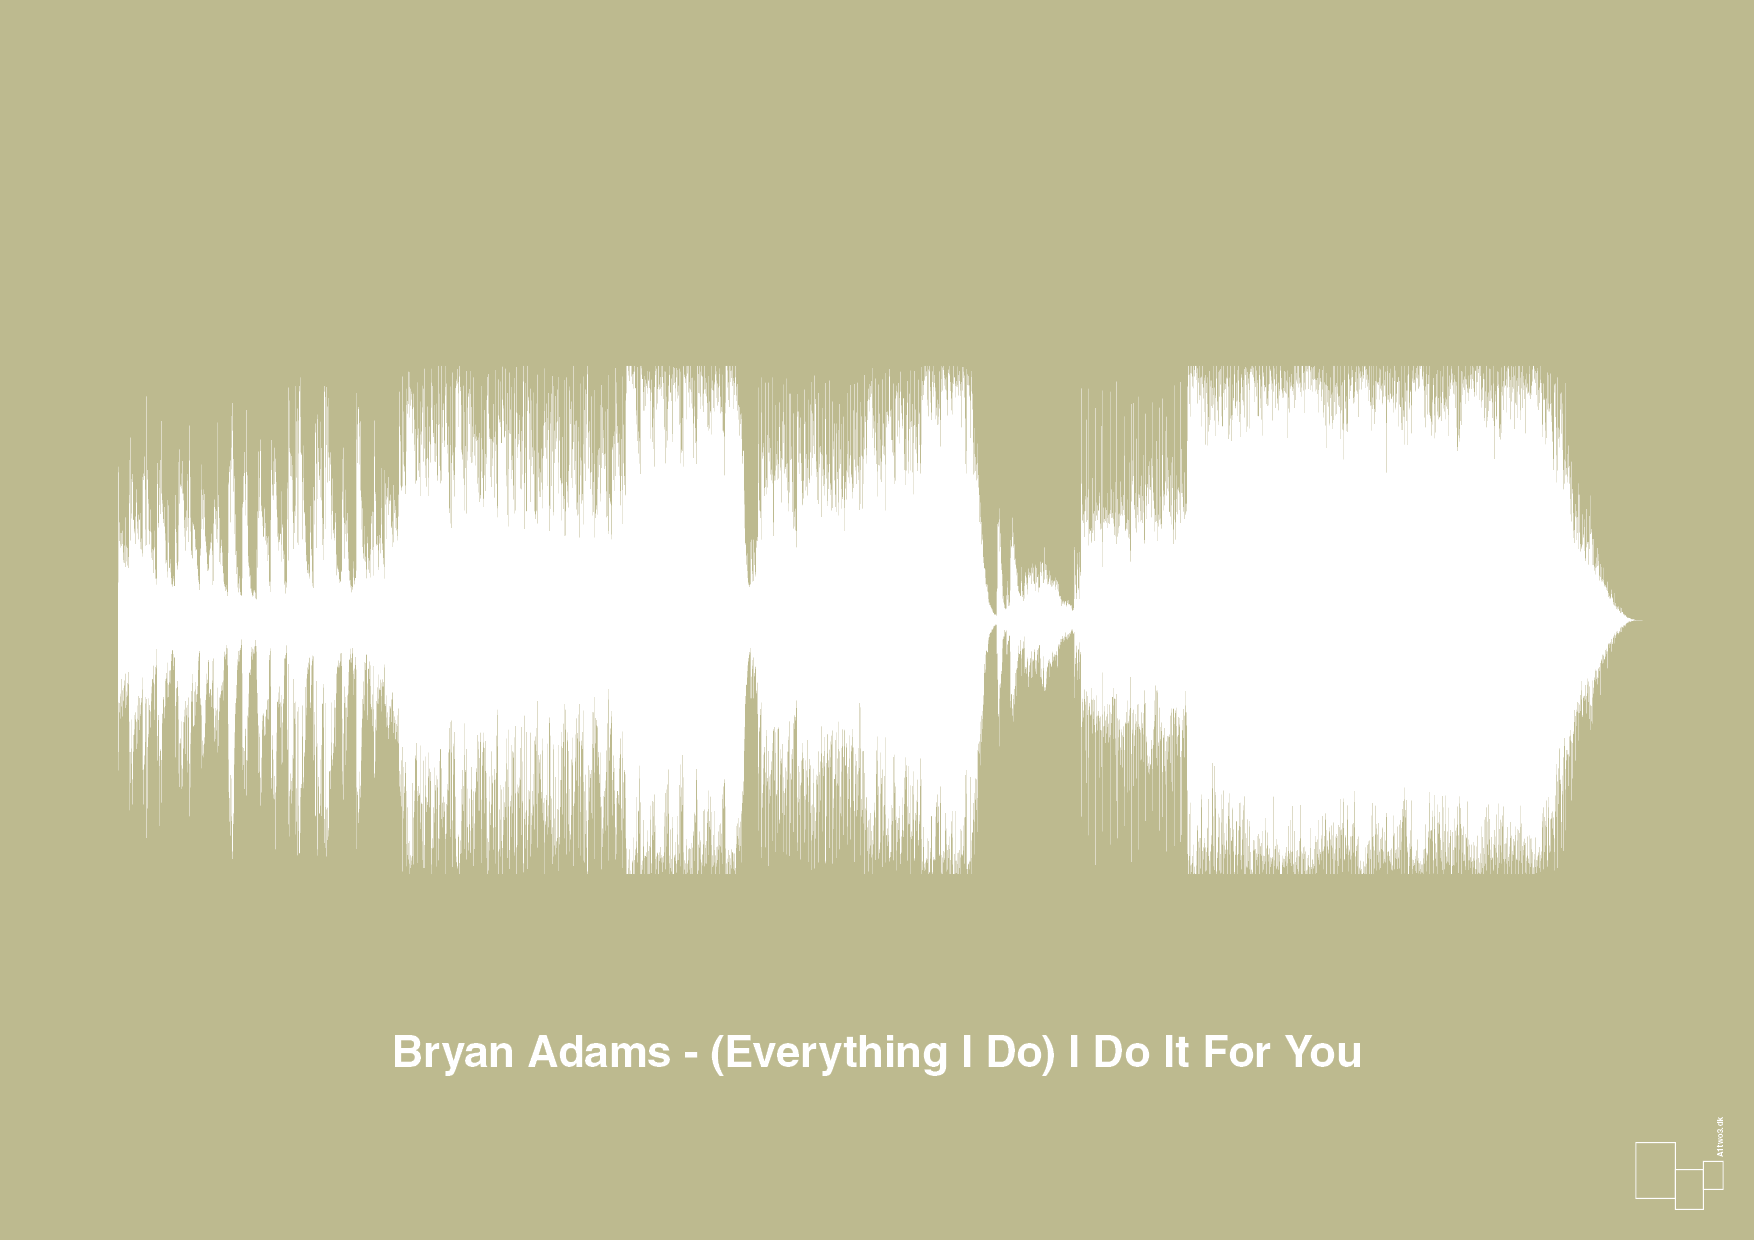 bryan adams - (everything i do) i do it for you - Plakat med Musik i Back to Nature